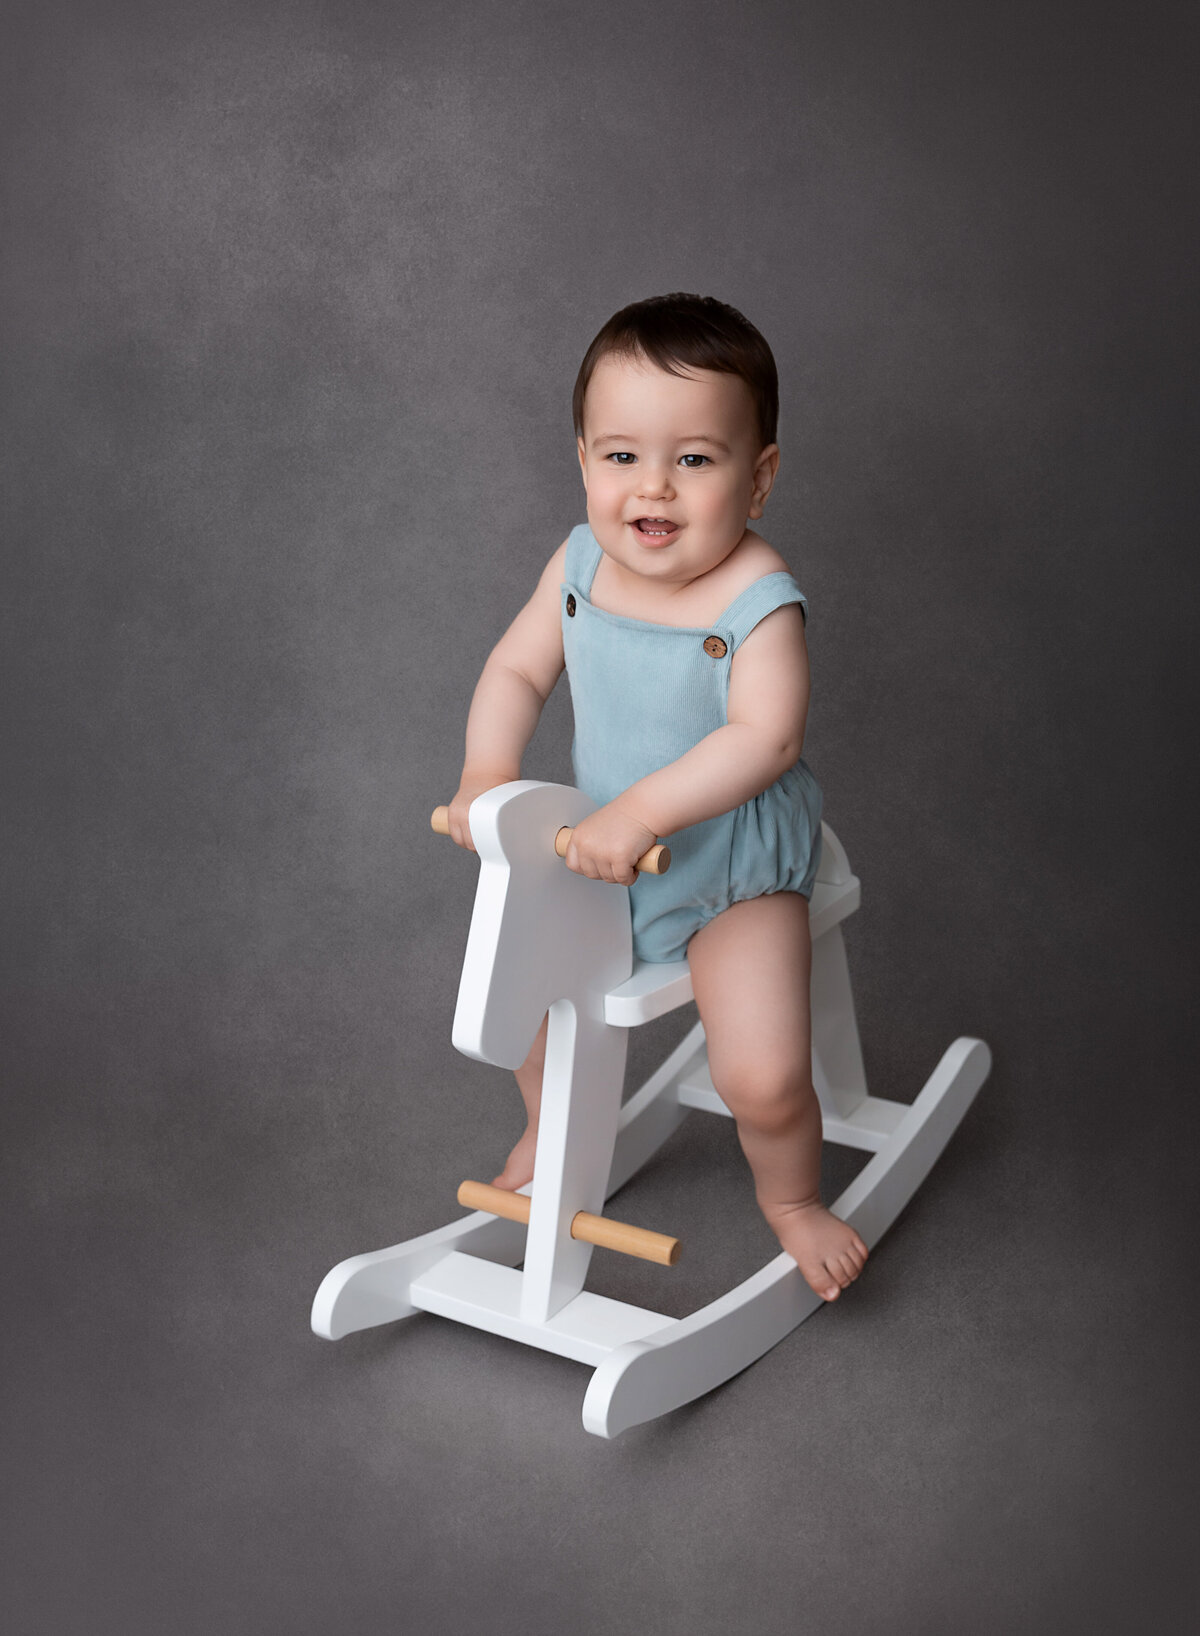 Baby boy sitting on a white rocking horse for baby milestone photoshoot. He is wearing a blue overall romper and smiling at the camera.